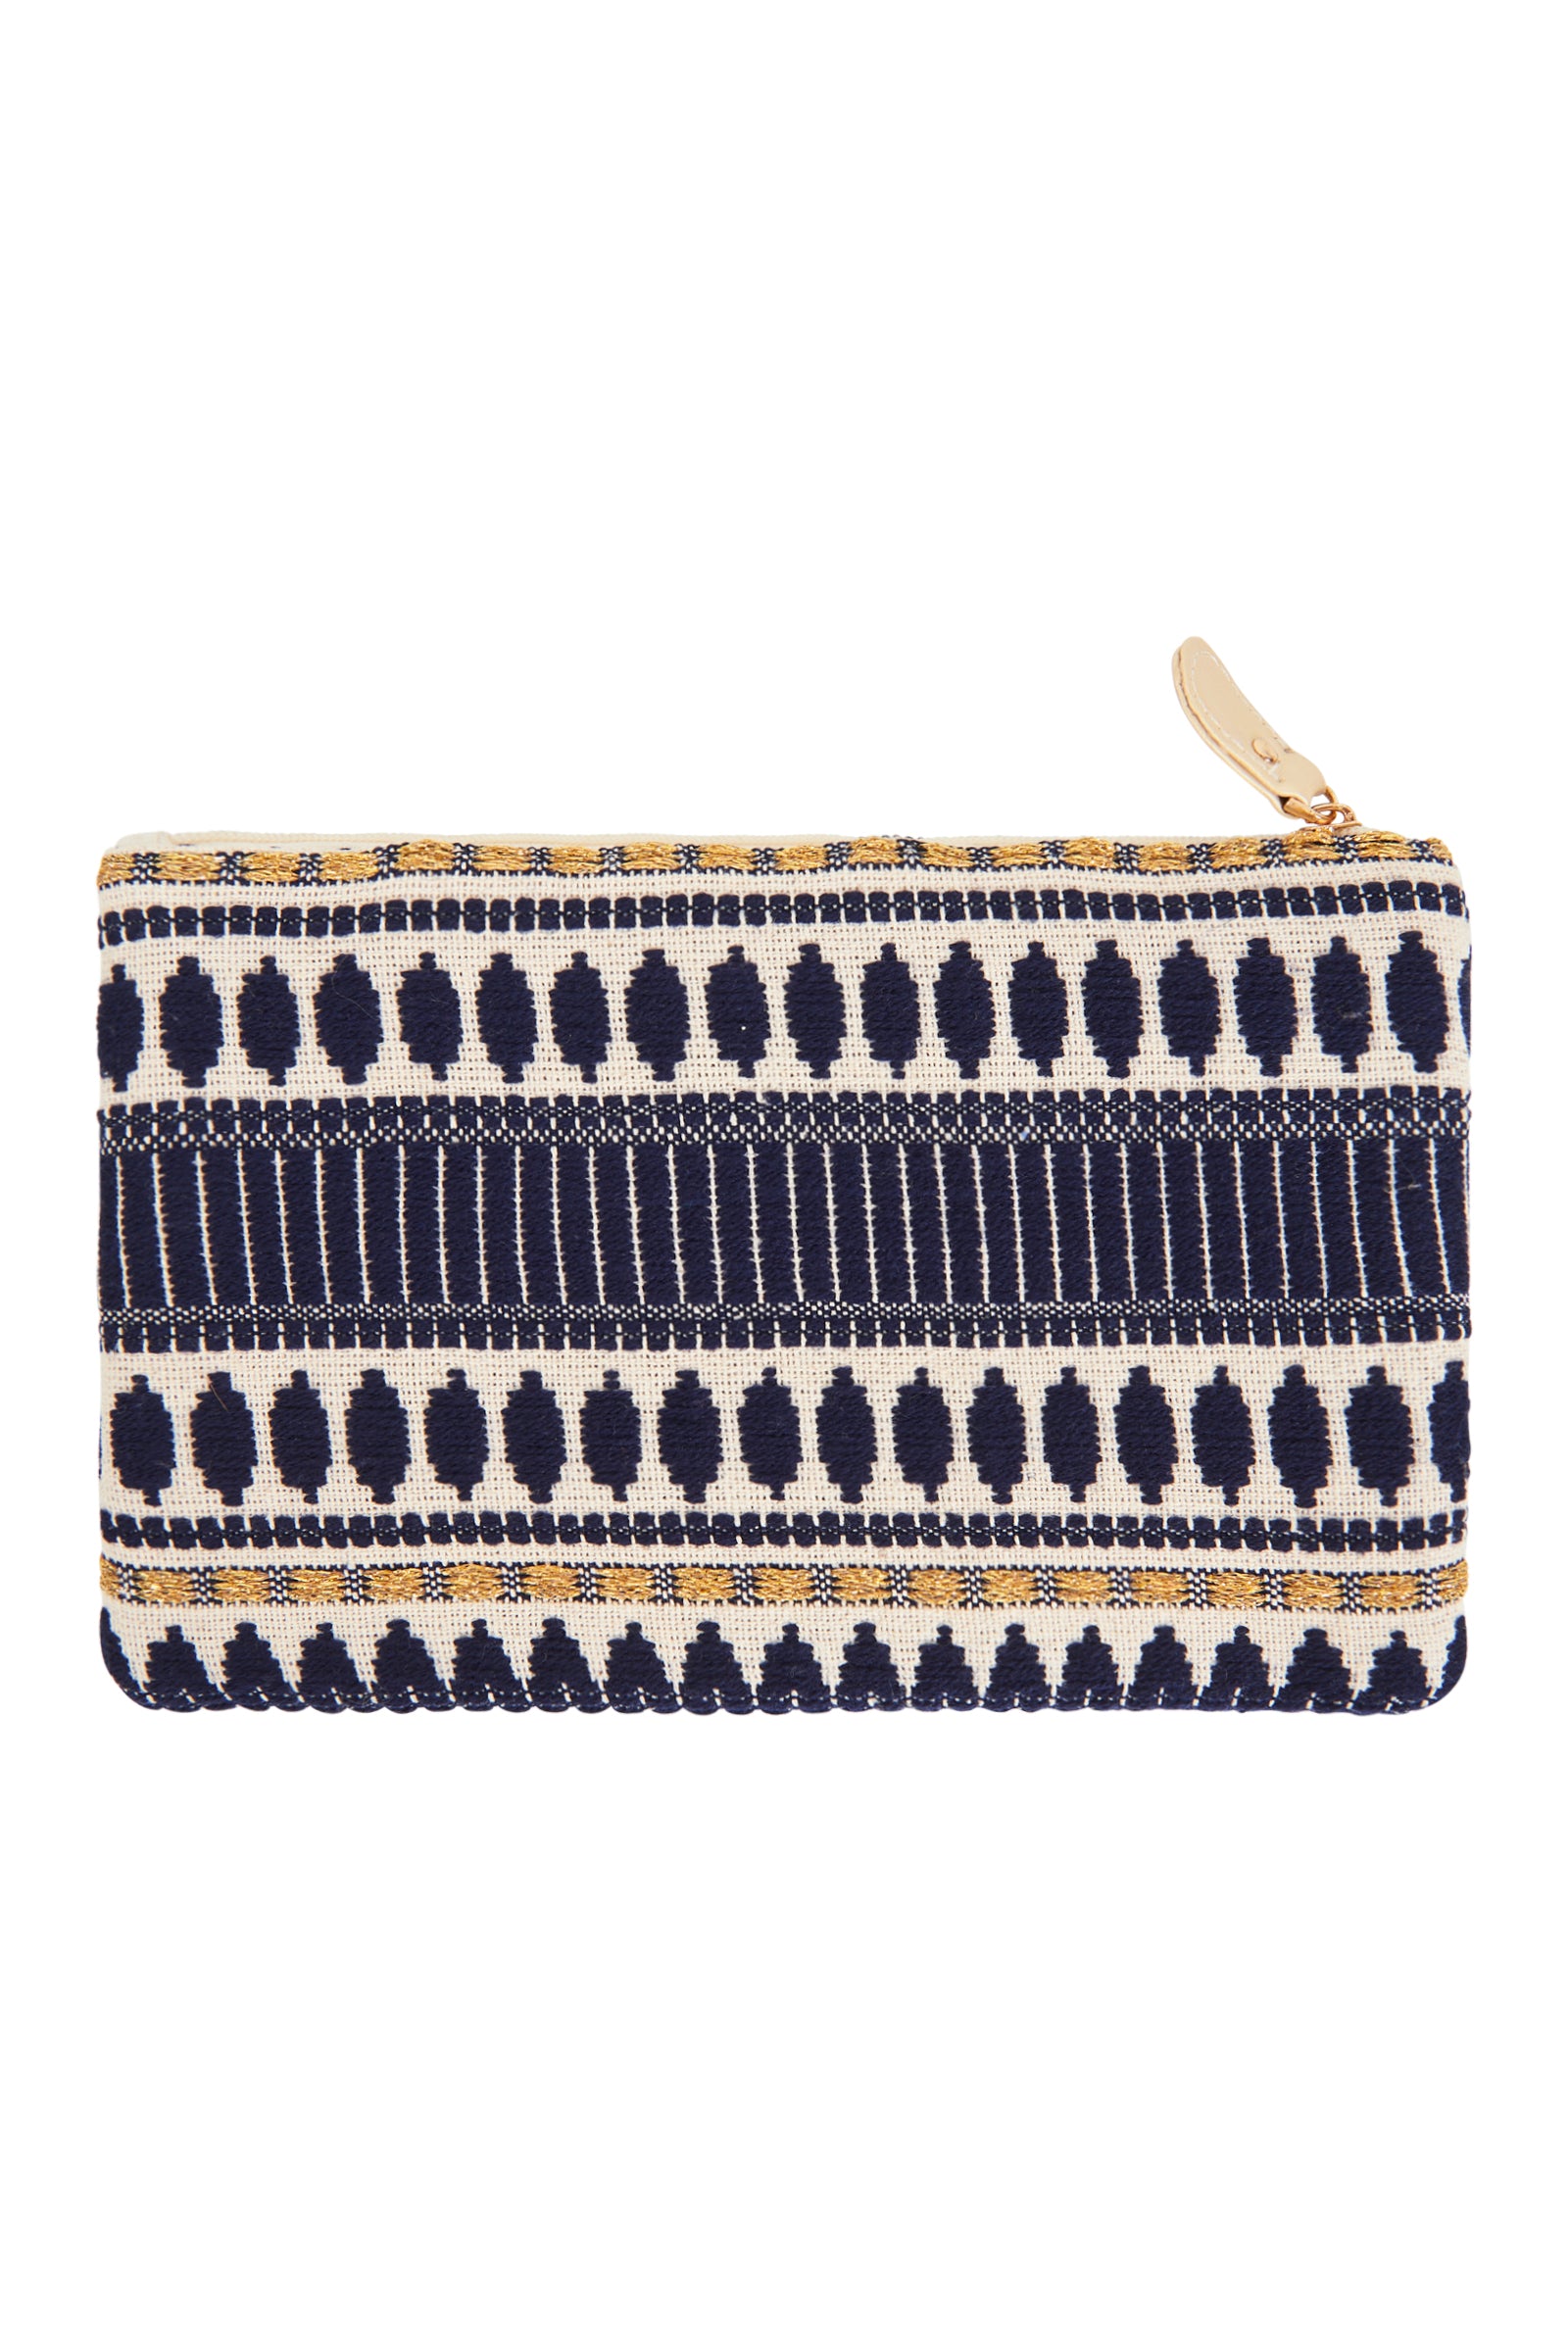 Paarl Pouch - Zenith - eb&ive Bag